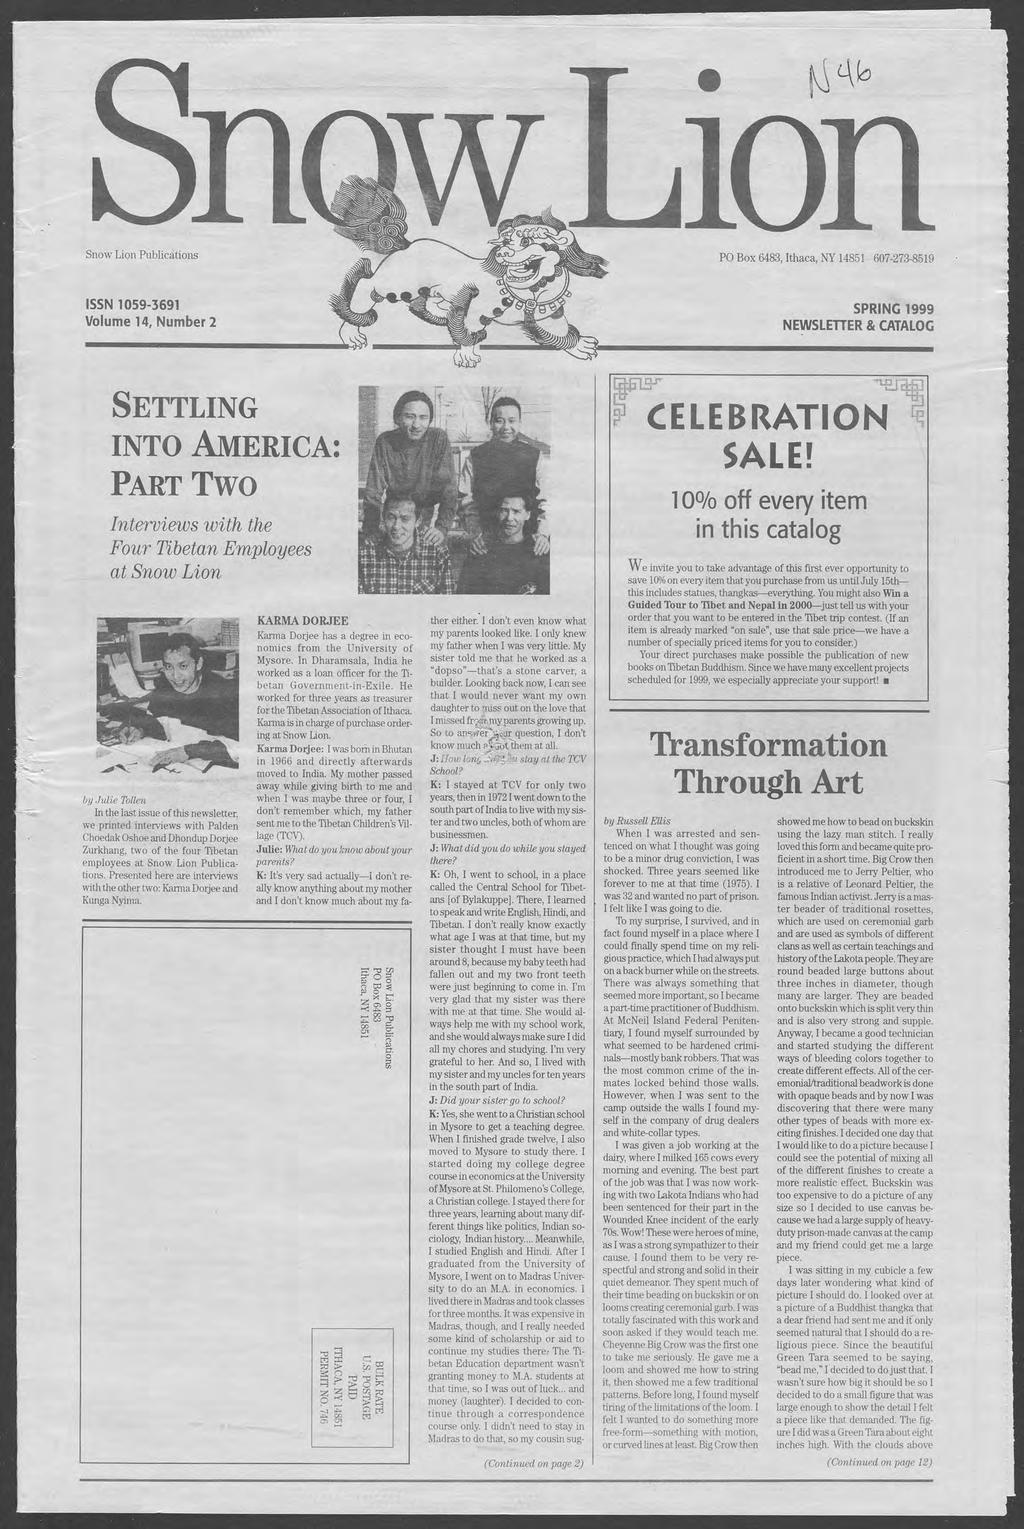 mlioii PO Box 6483, Ithaca, NY 14851 607-273-8519 SPRING 1999 NEWSLETTER & CATALOG SETTLING INTO AMERICA: PART TWO Interviews with the Four Tibetan Employees at Snow Lion by Julie Tollen In the last